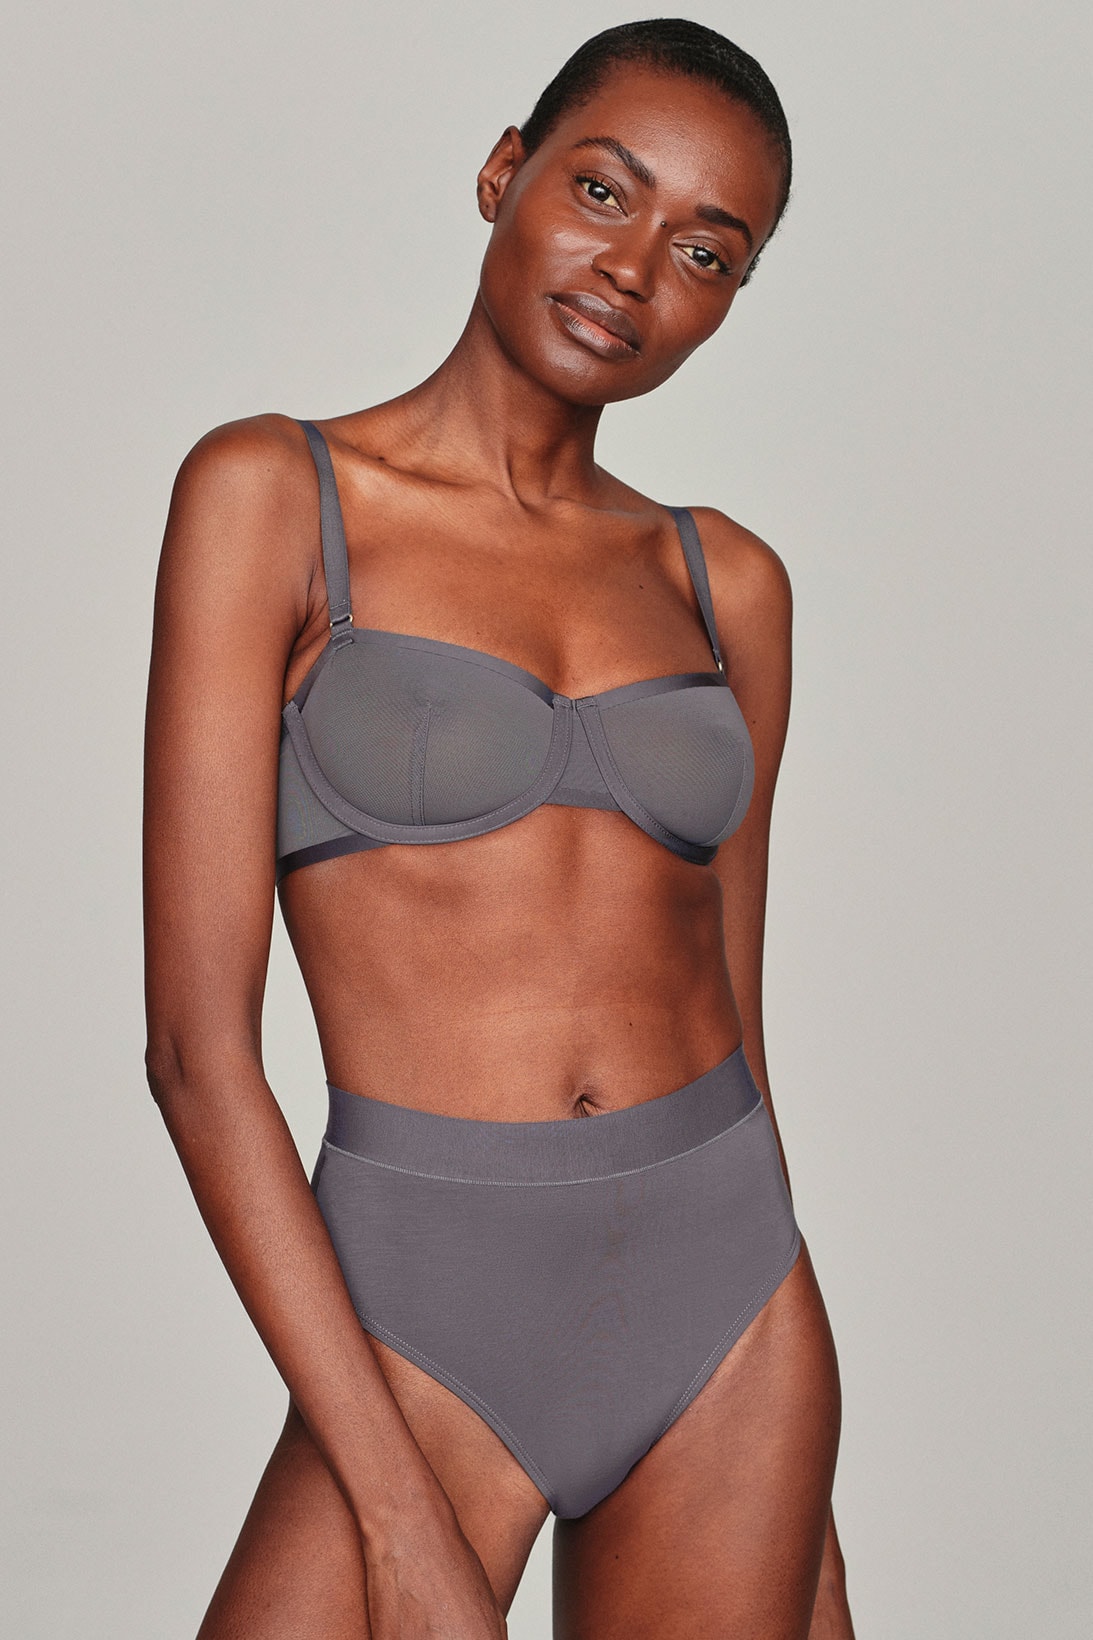 cuup lingerie underwear alma thomas art-inspired capsule gray slate wired bra briefs mid rise